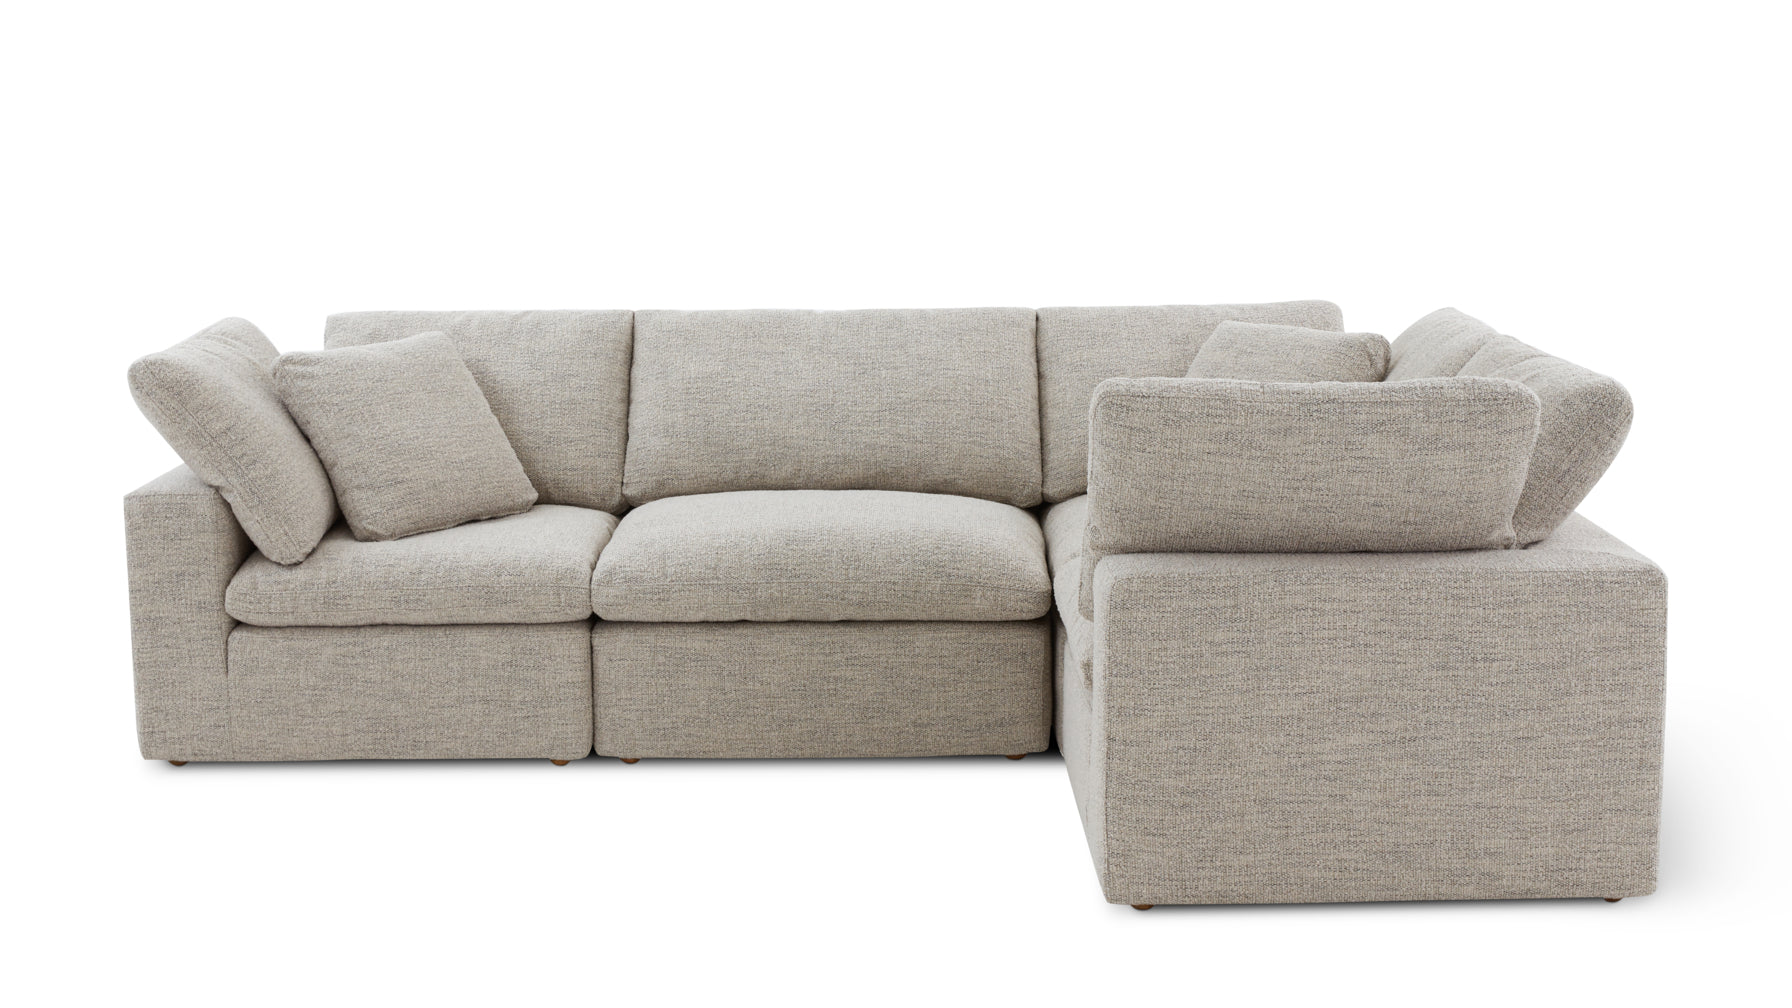 Movie Night™ 4-Piece Modular Sectional Closed, Large, Oatmeal - Image 1